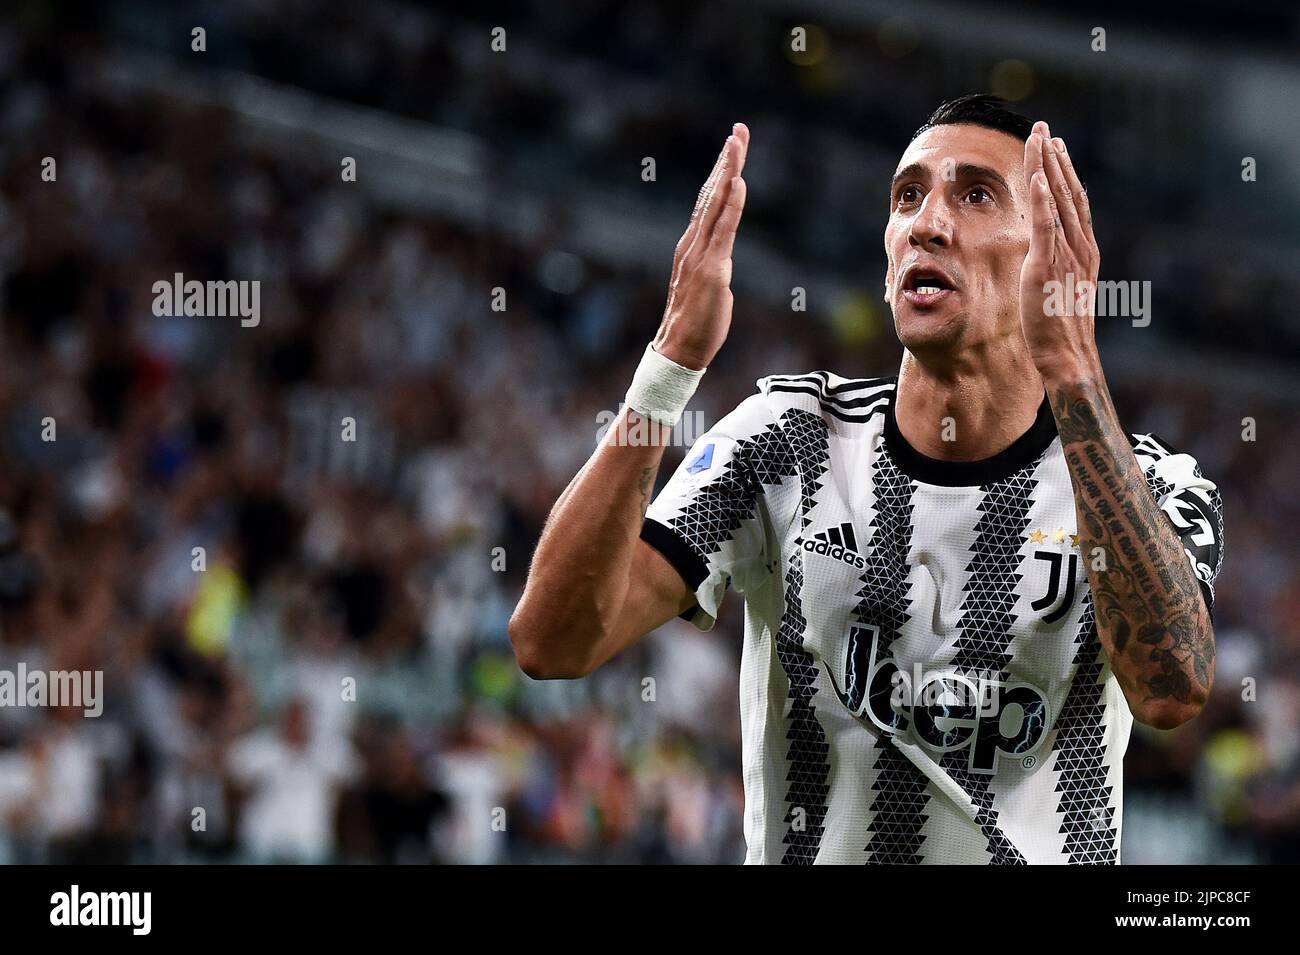 Turin, Italy. 15 August 2022. Angel Di Maria of Juventus FC celebrates after scoring a goal during the Serie A football match between Juventus FC and US Sassuolo. Credit: Nicolò Campo/Alamy Live News Stock Photo